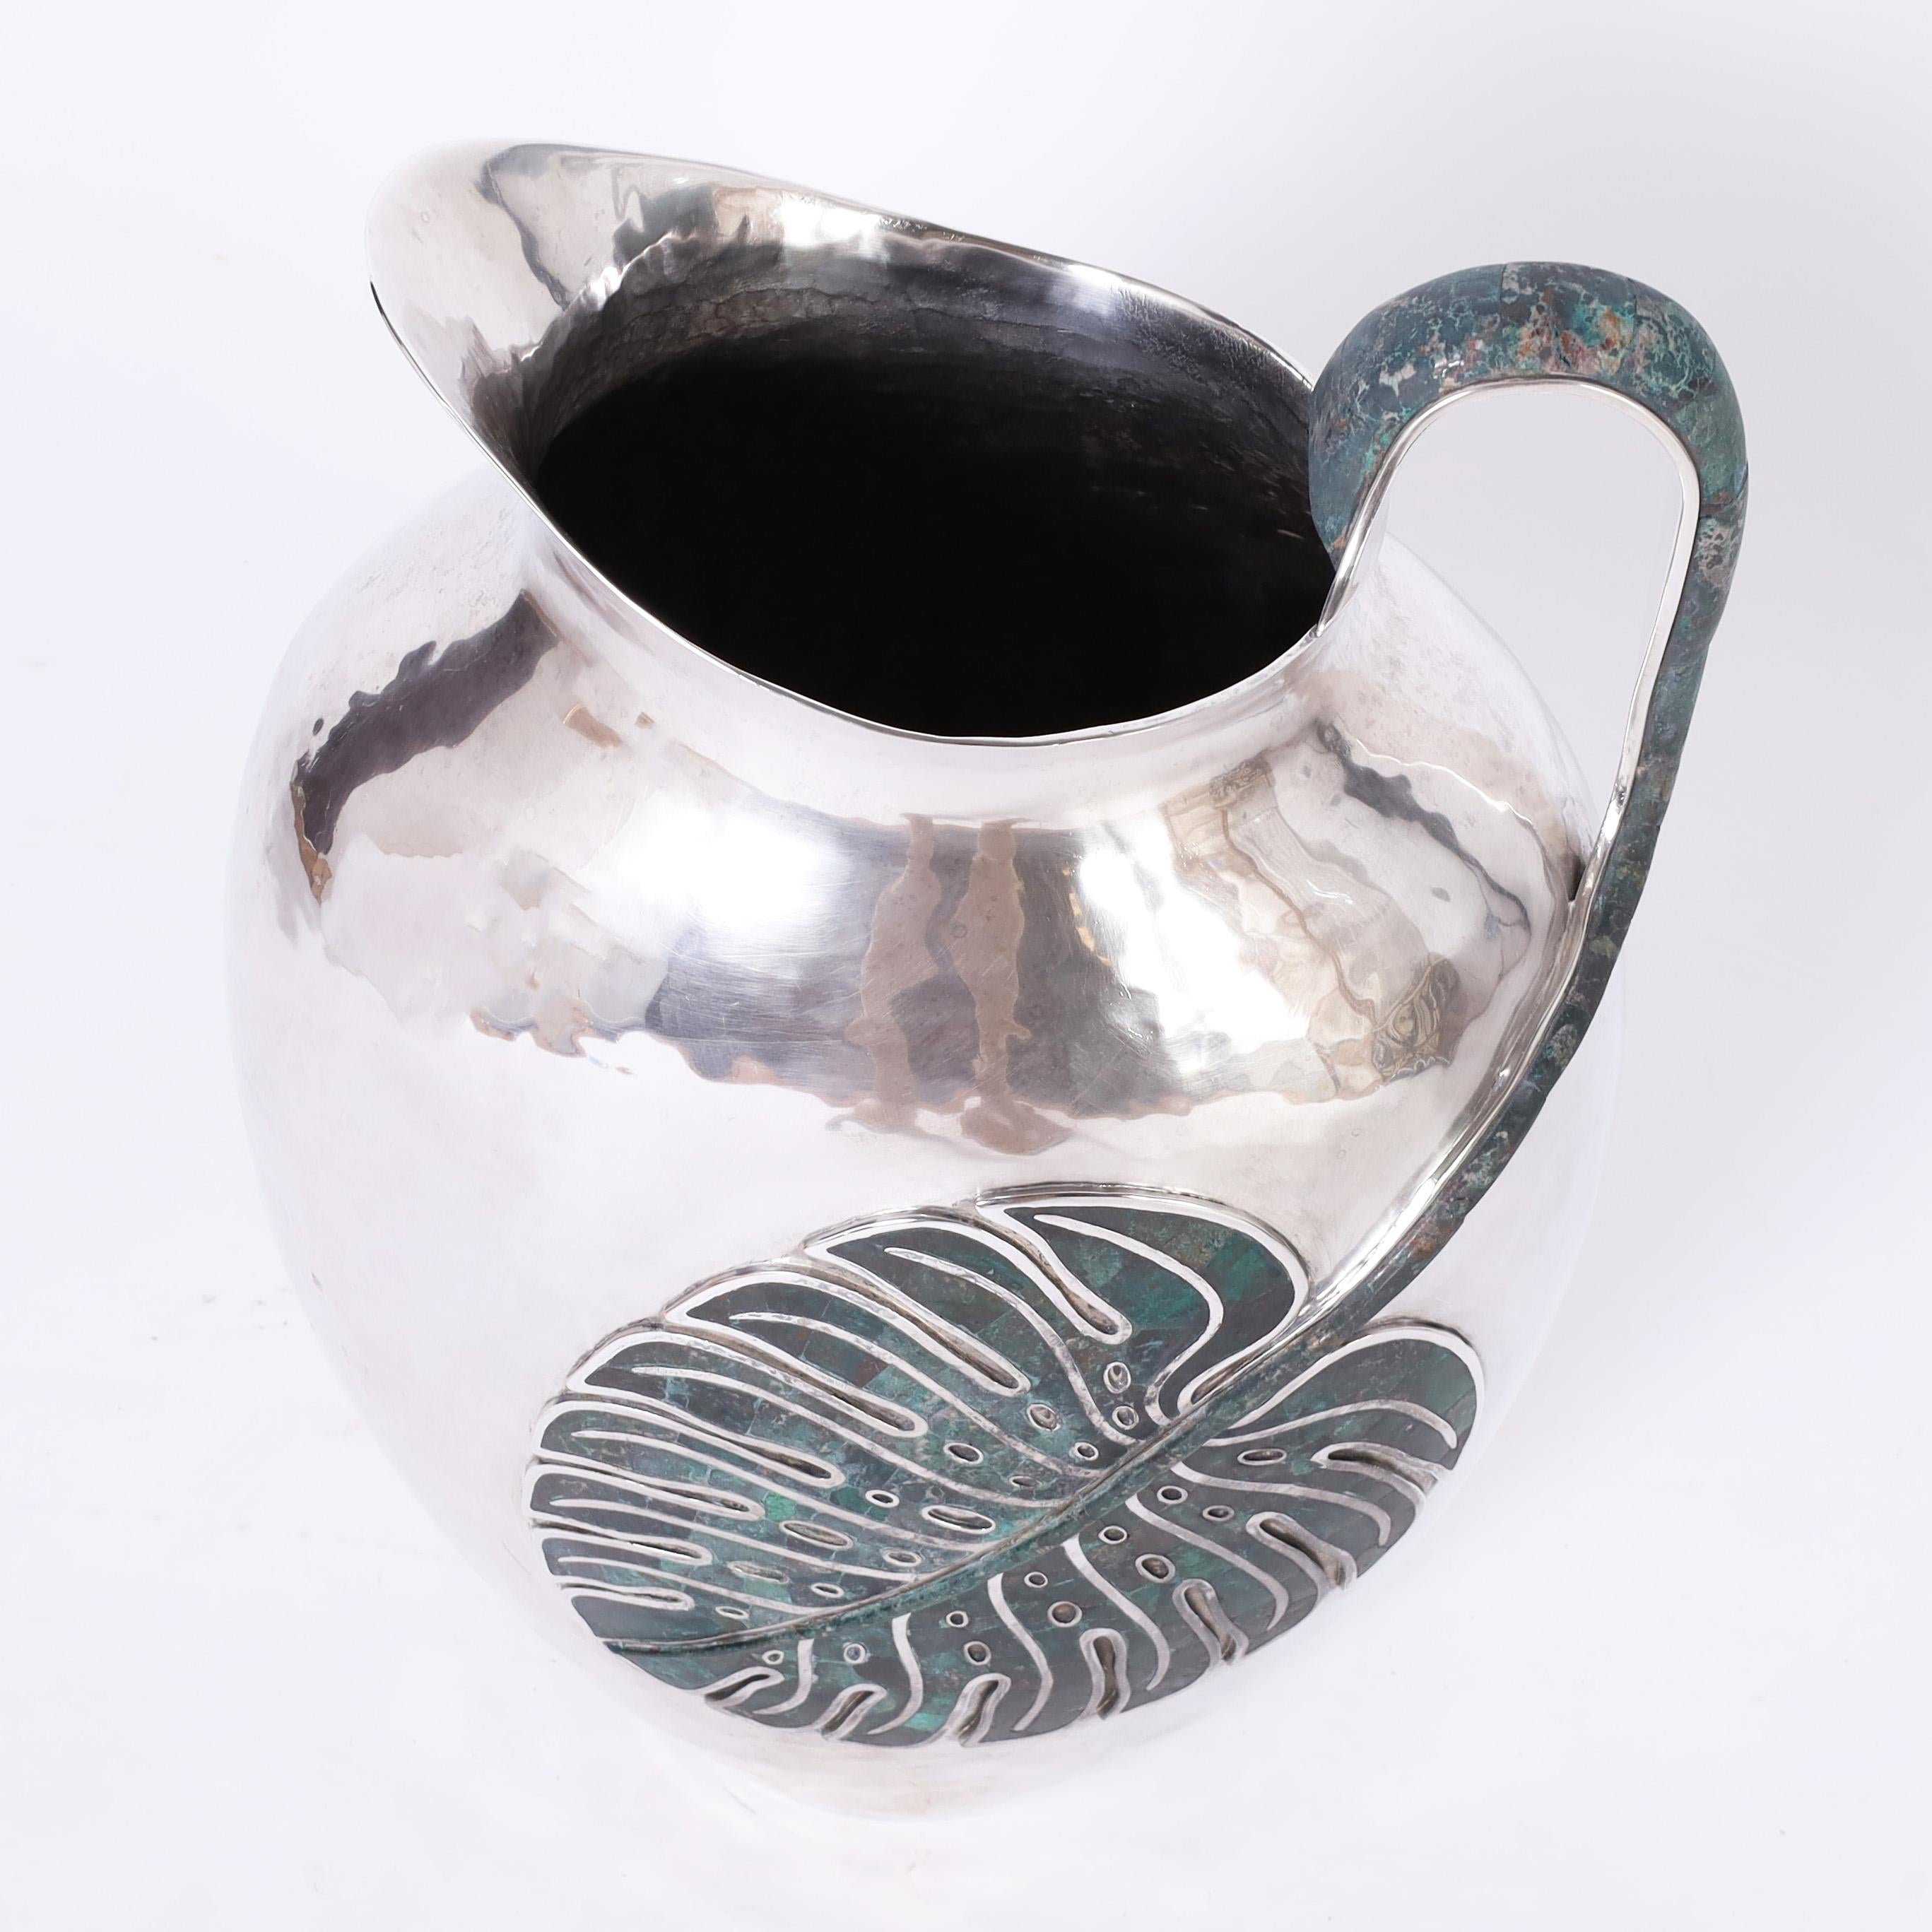 Remarkable vintage pitcher handcrafted with silver plate on hammered copper in a one of a kind object of art featuring a stone philodendron leaf handle. Signed Emilia Castillo on the bottom.